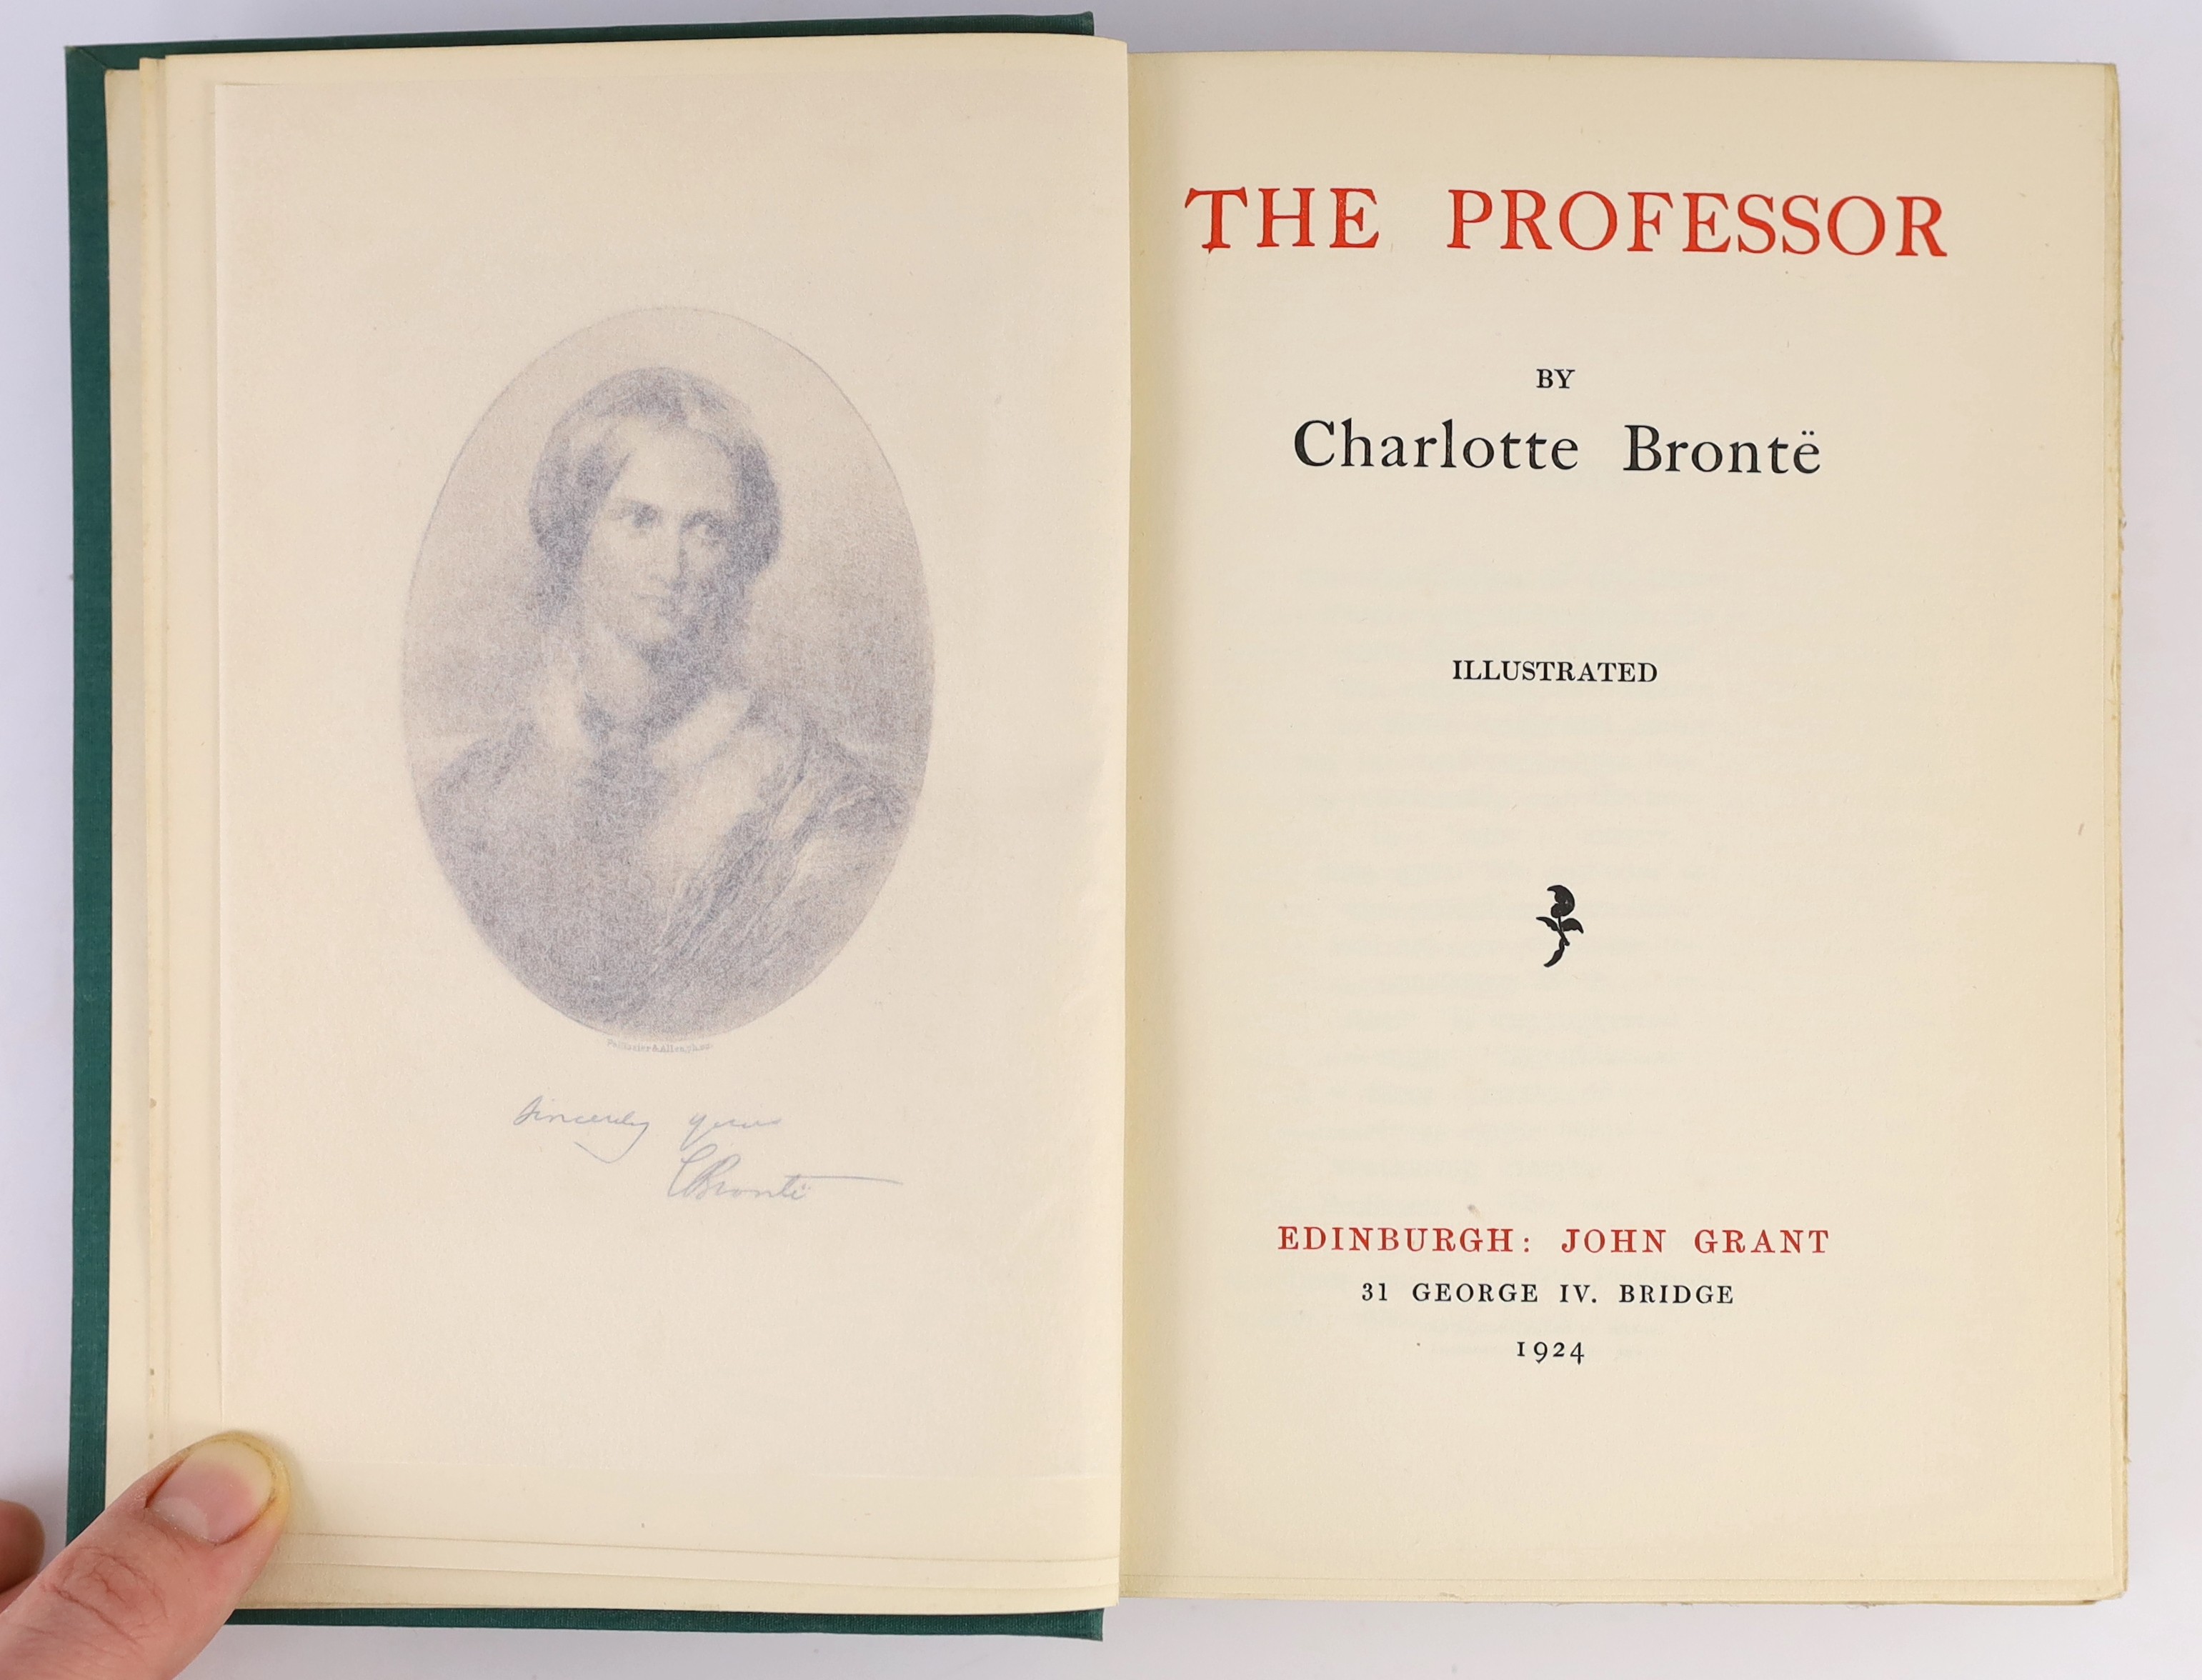 Bronte, Charlotte, Emily and Anne - Works. - ‘’Novels of the Sisters Bronte.’’ - 12 vols, the Thornton edition, edited by Temple Scott, illustrated with 67 plates, original cloth gilt, Edinburgh, 1924